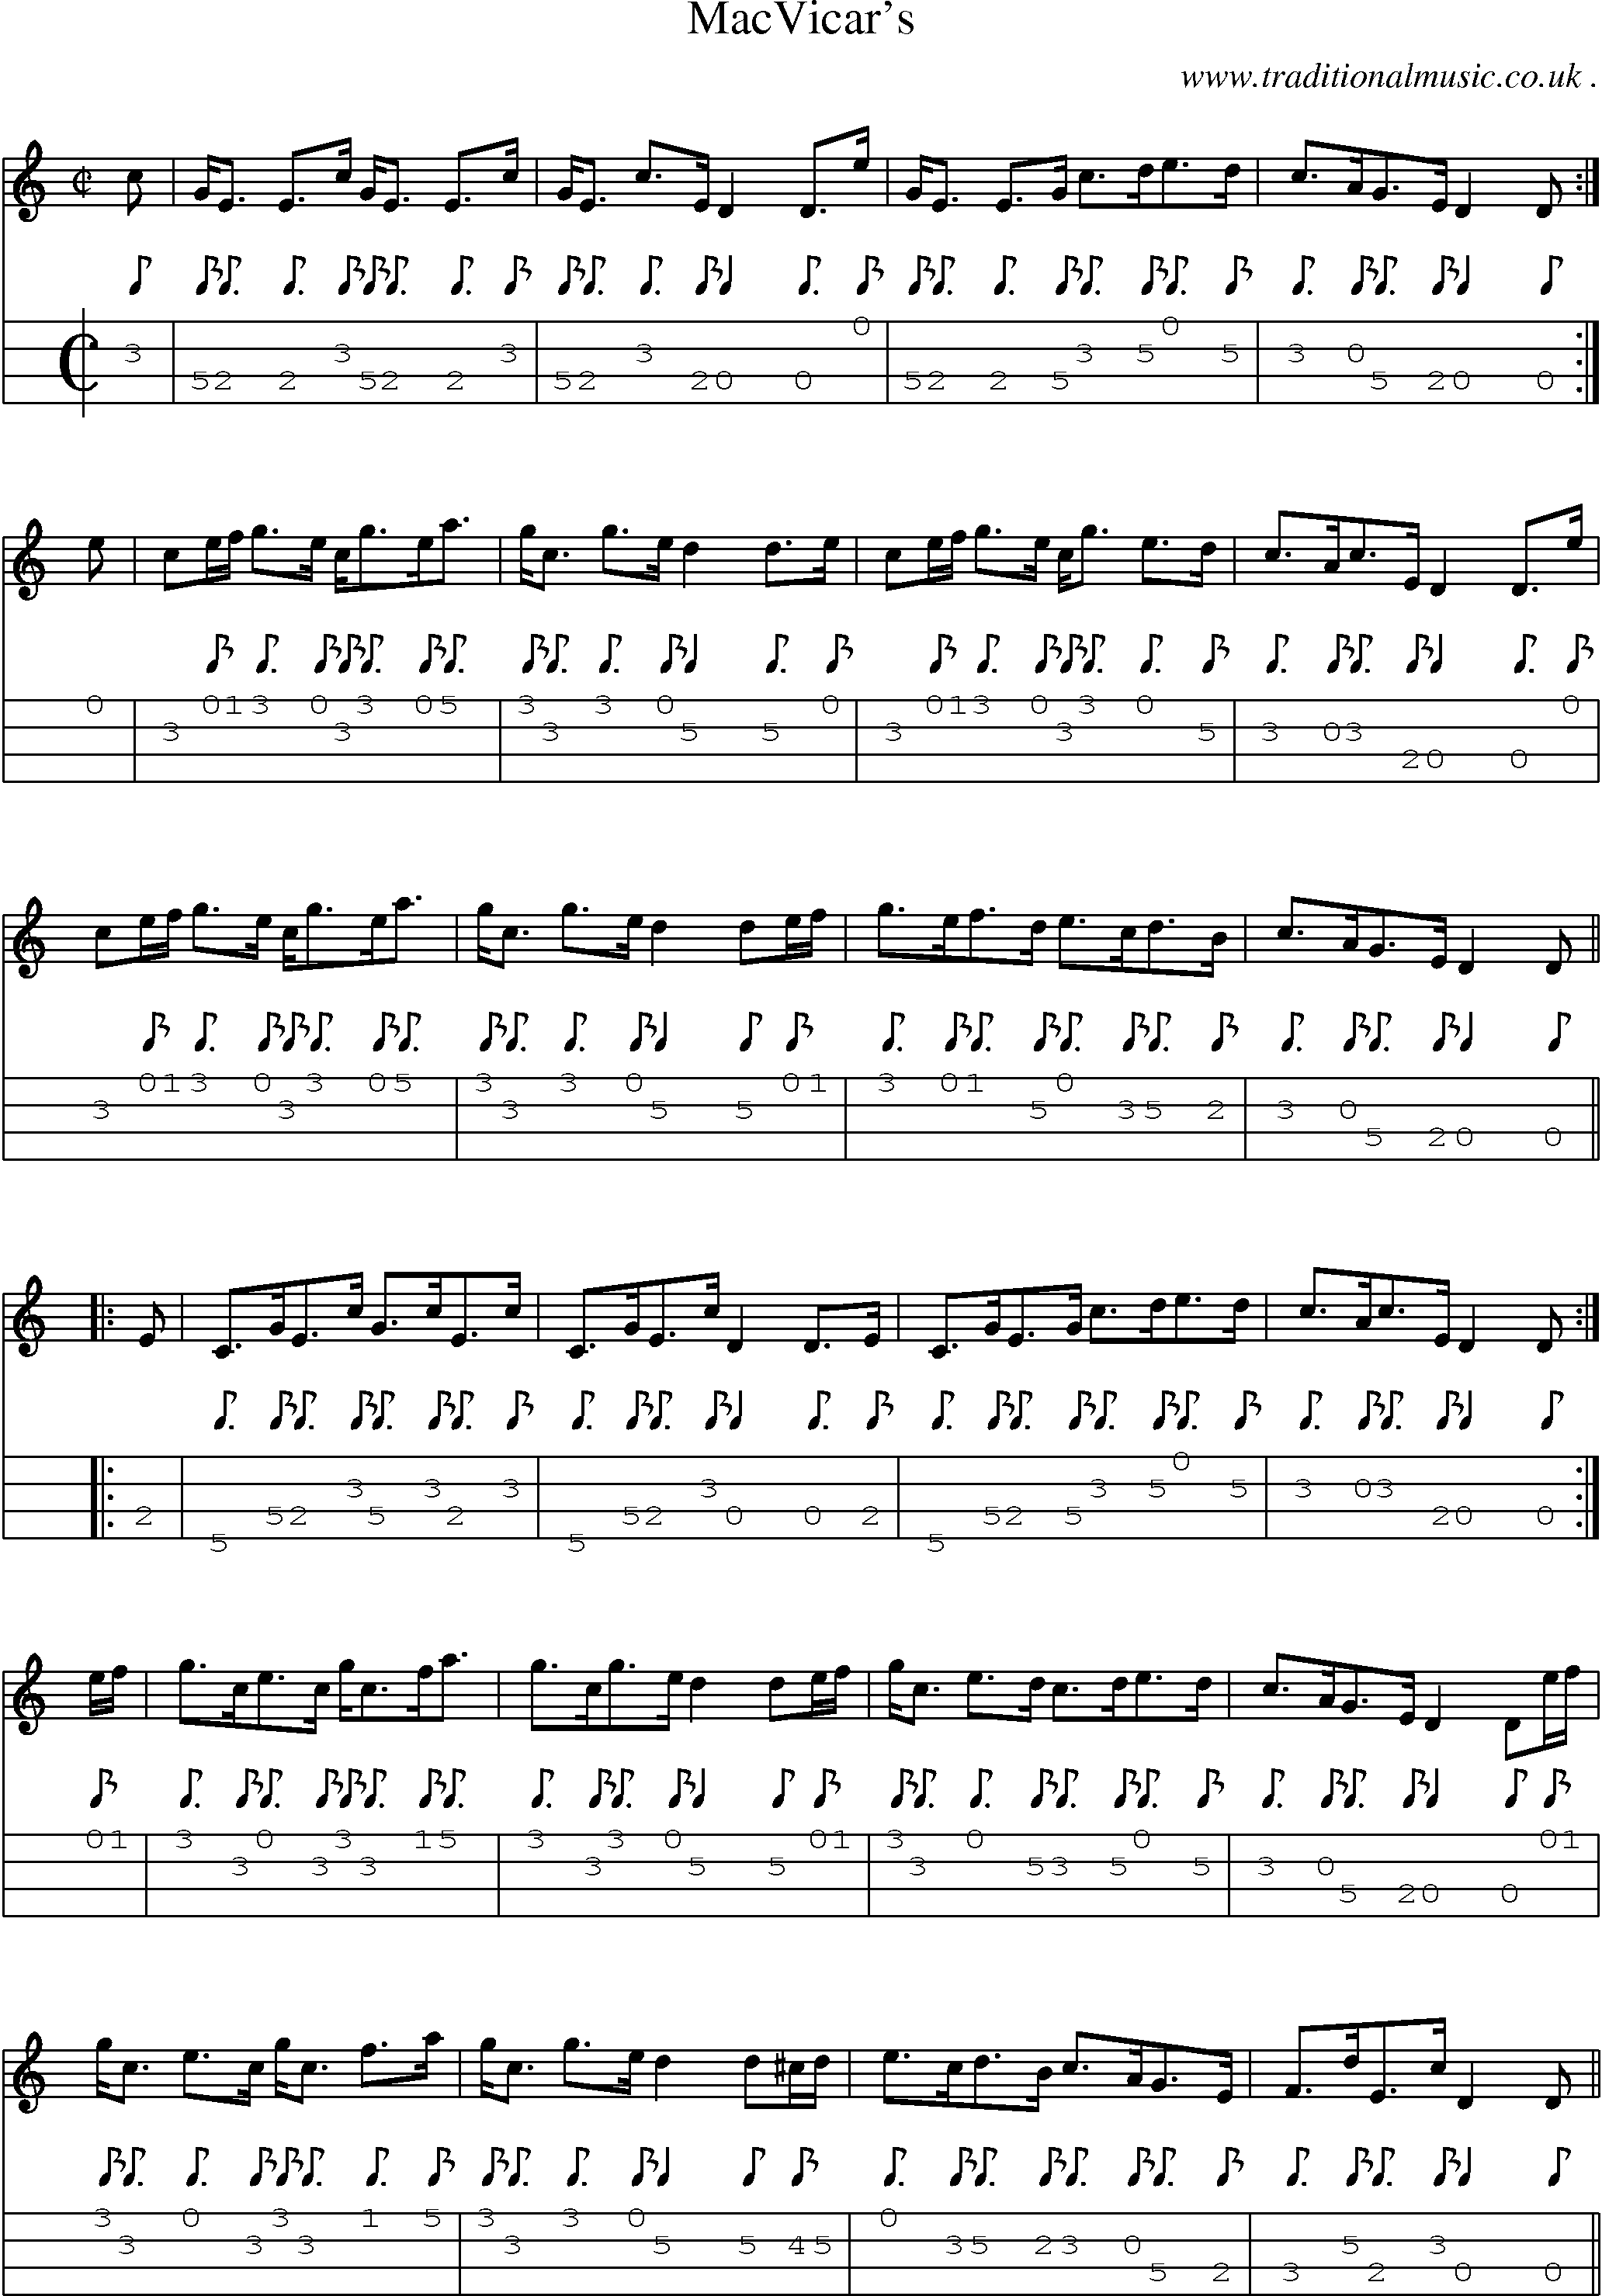 Sheet-music  score, Chords and Mandolin Tabs for Macvicars